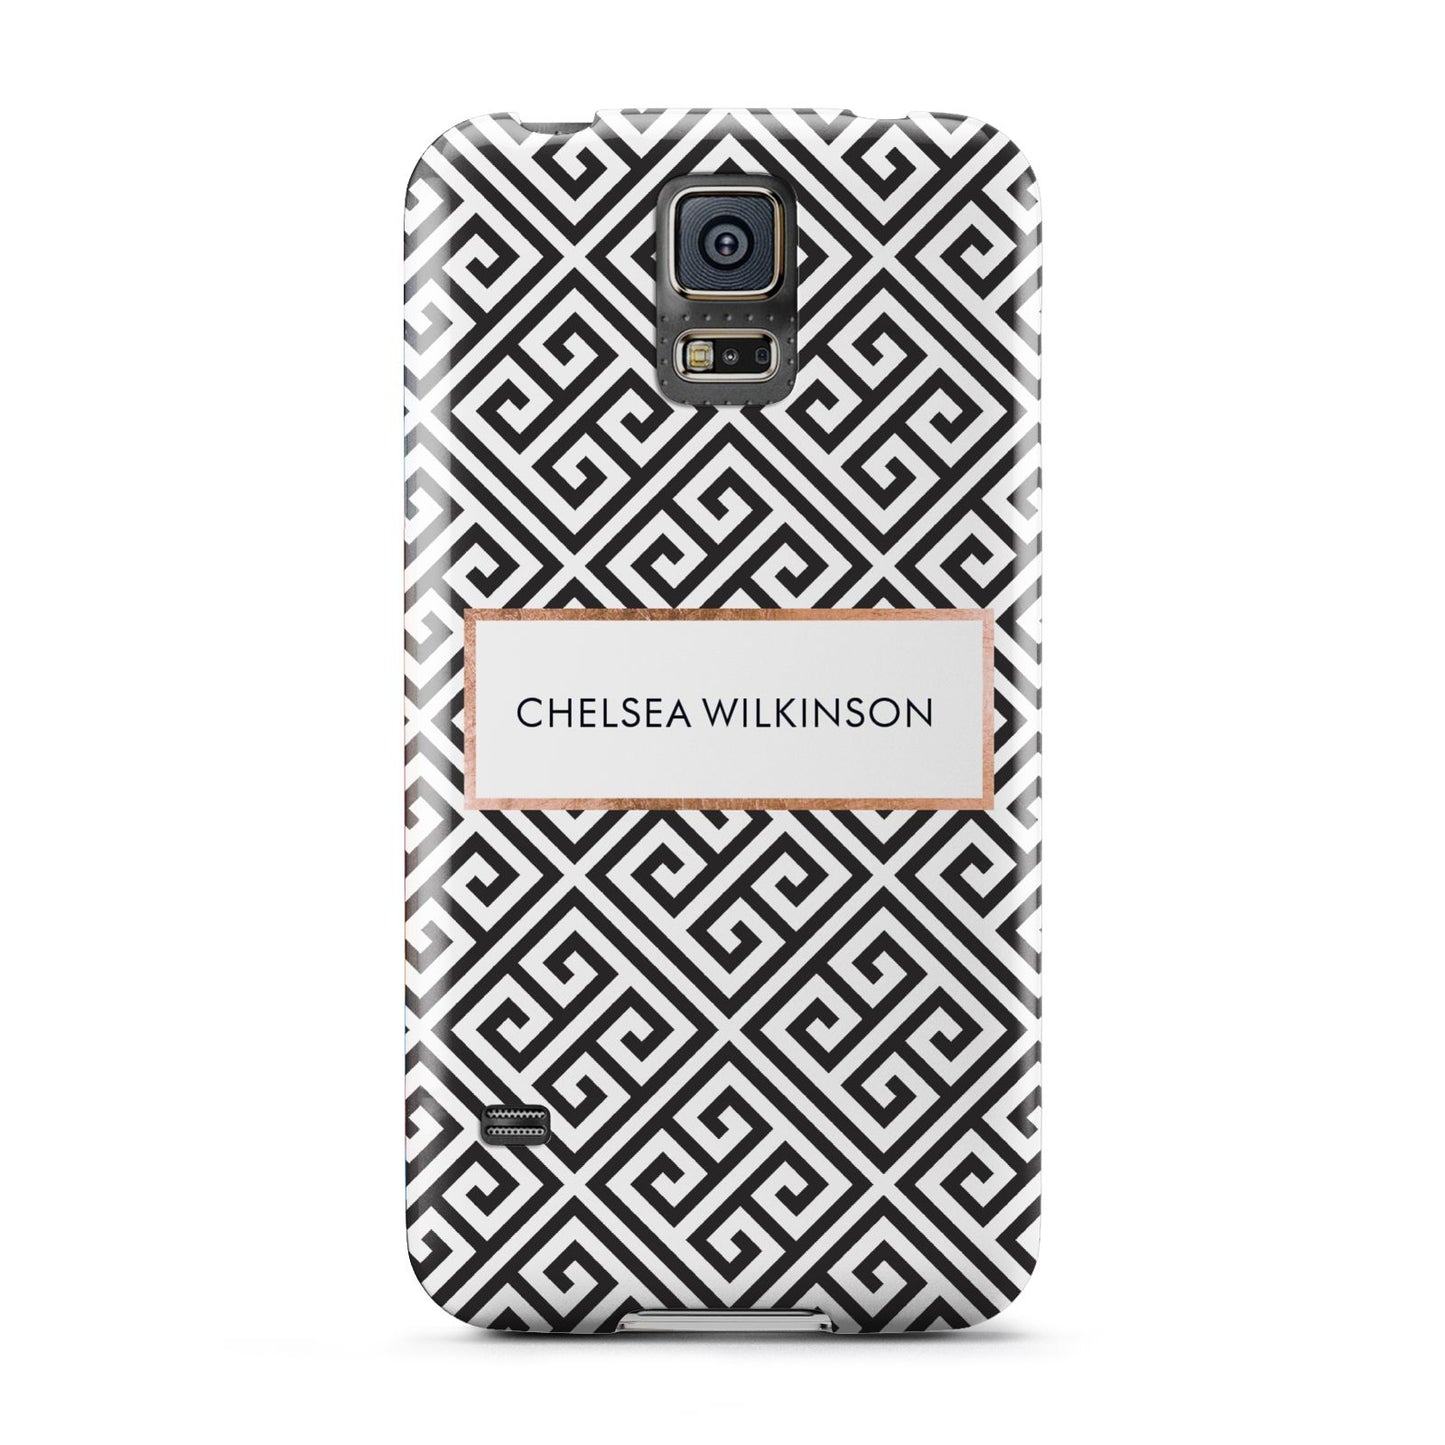 Personalised Black Pattern Name Or Initials Samsung Galaxy S5 Case